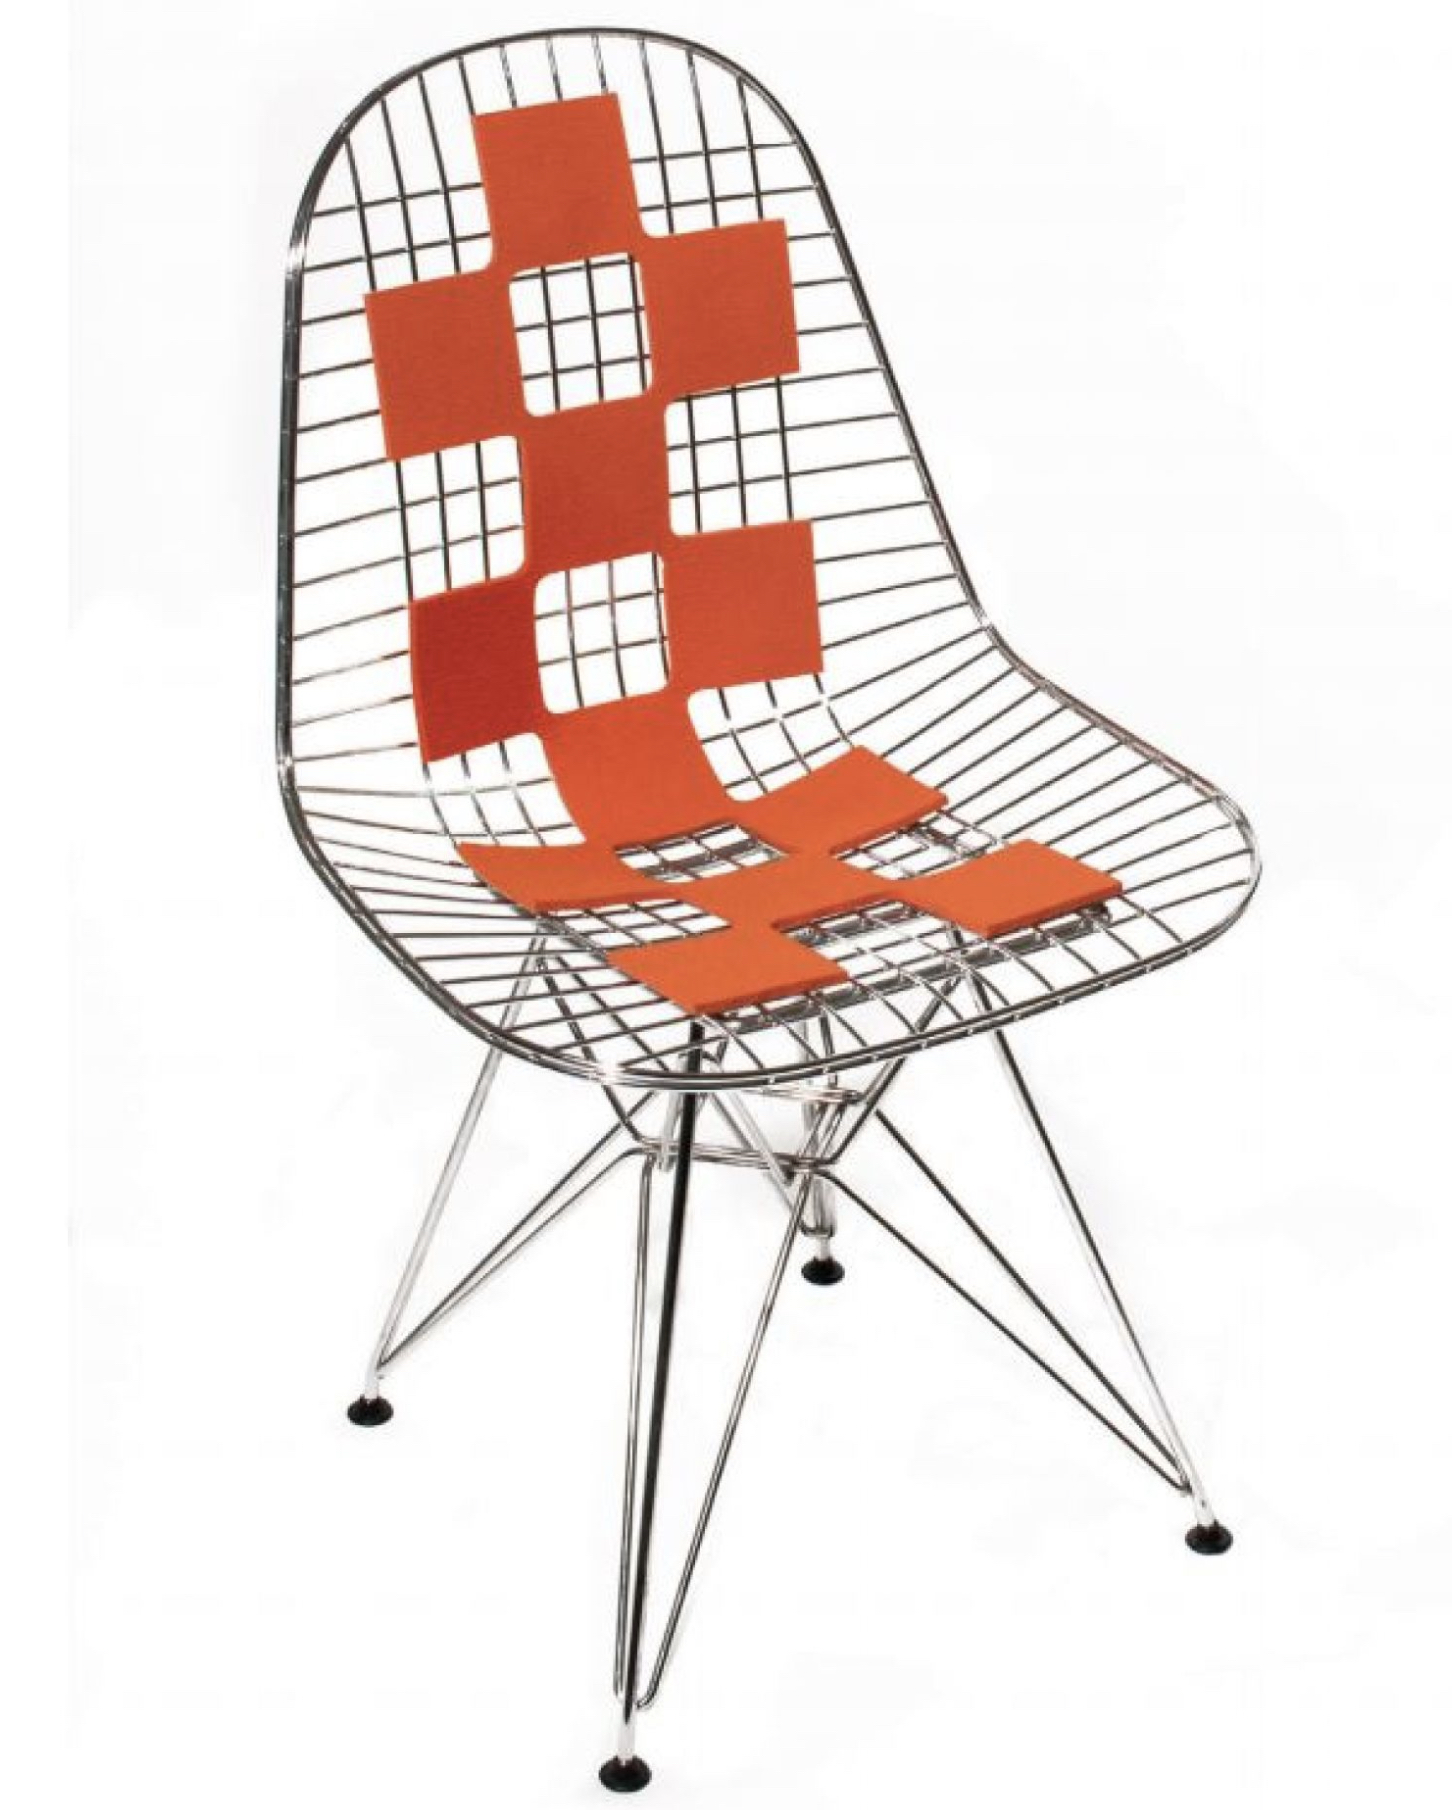 Seat Cushion for Eames WIRE CHAIR